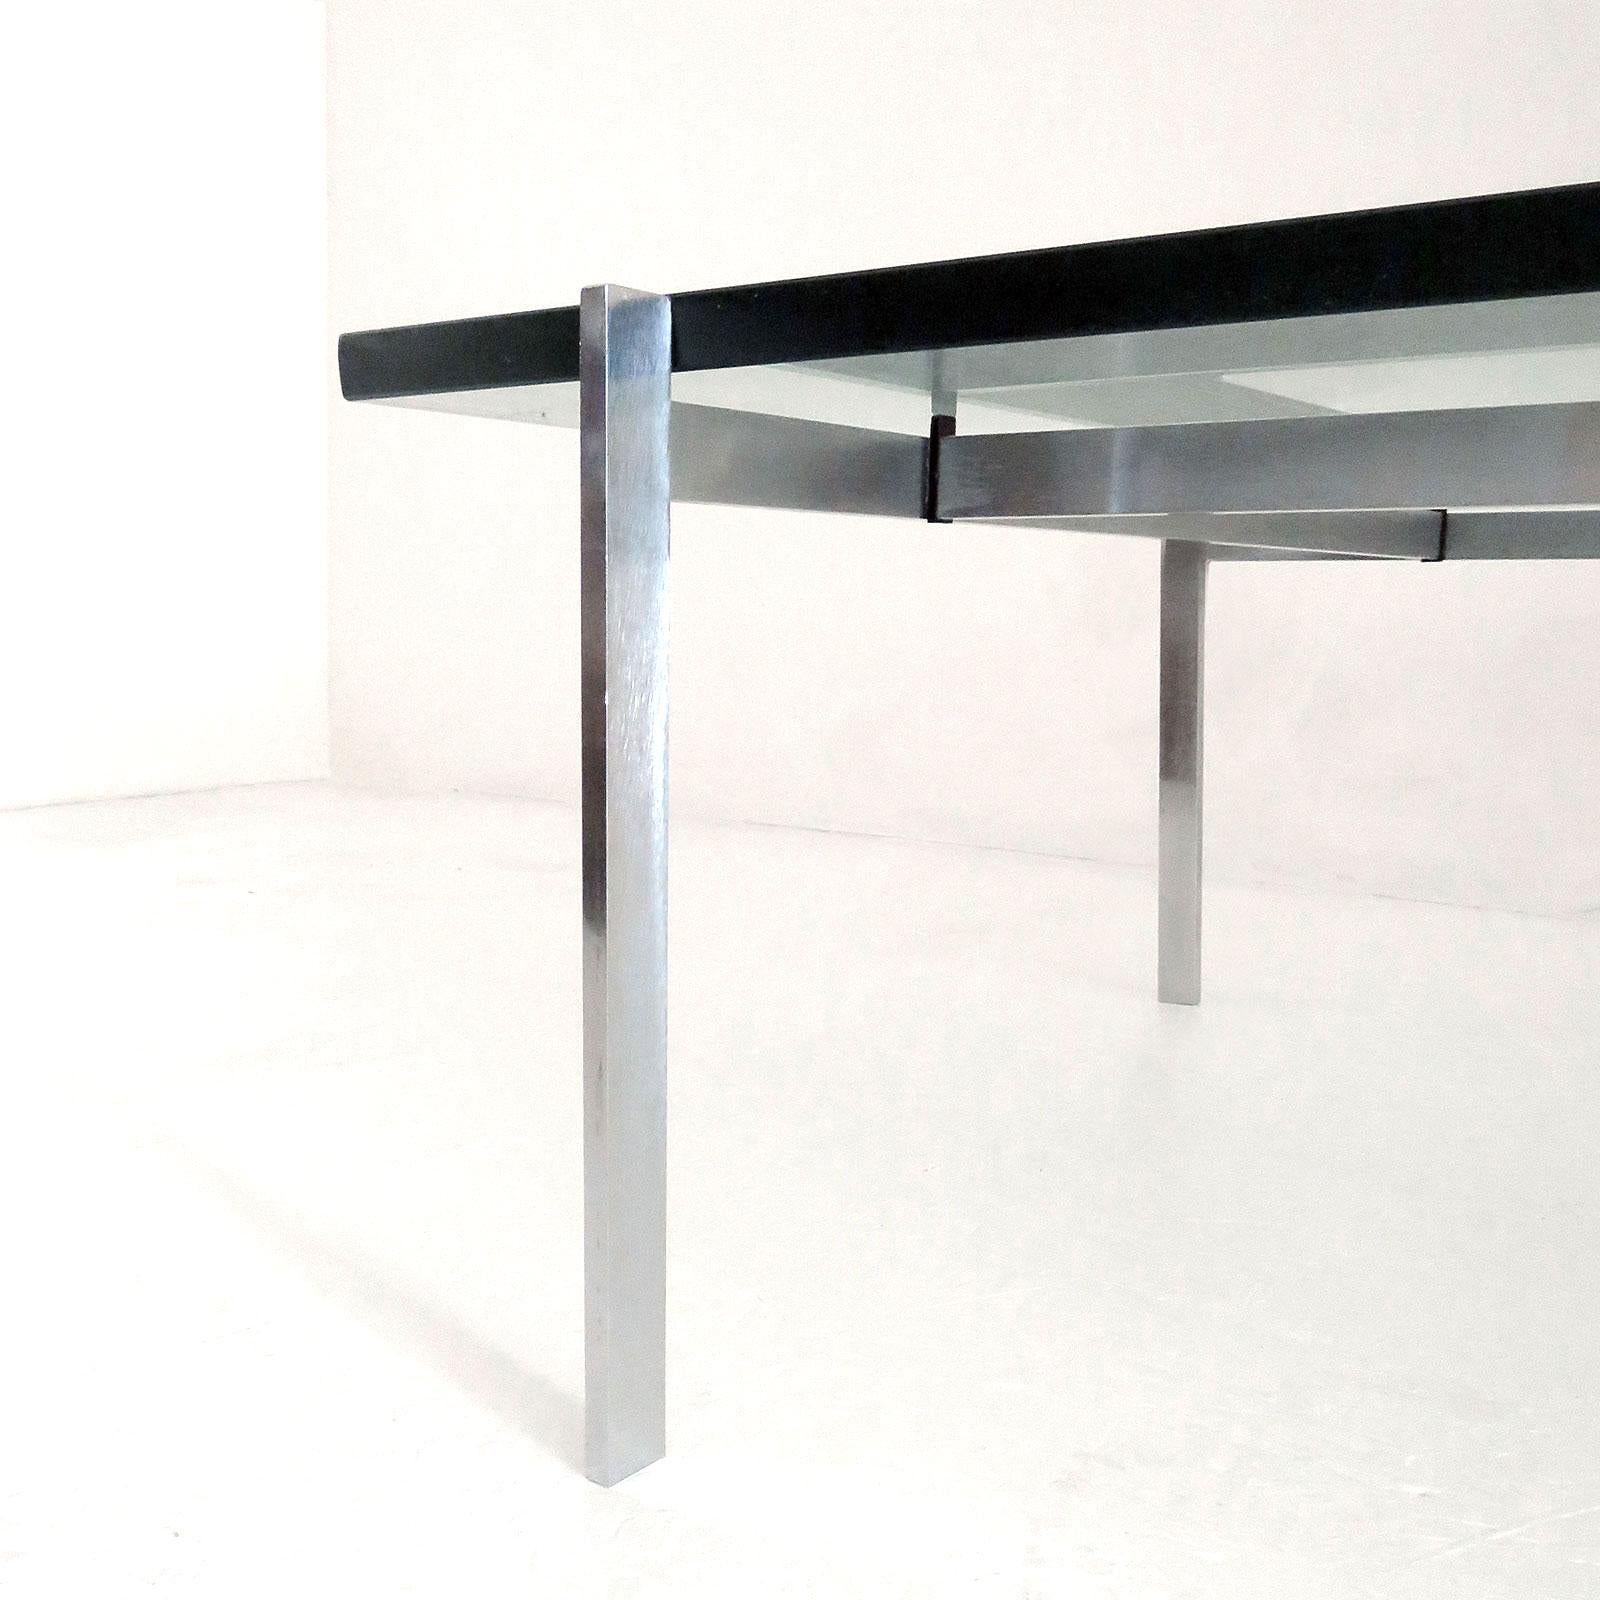 Poul Kjaerholm PK61 for E. Kold Christensen Coffee Table, 1969 In Good Condition For Sale In Los Angeles, CA